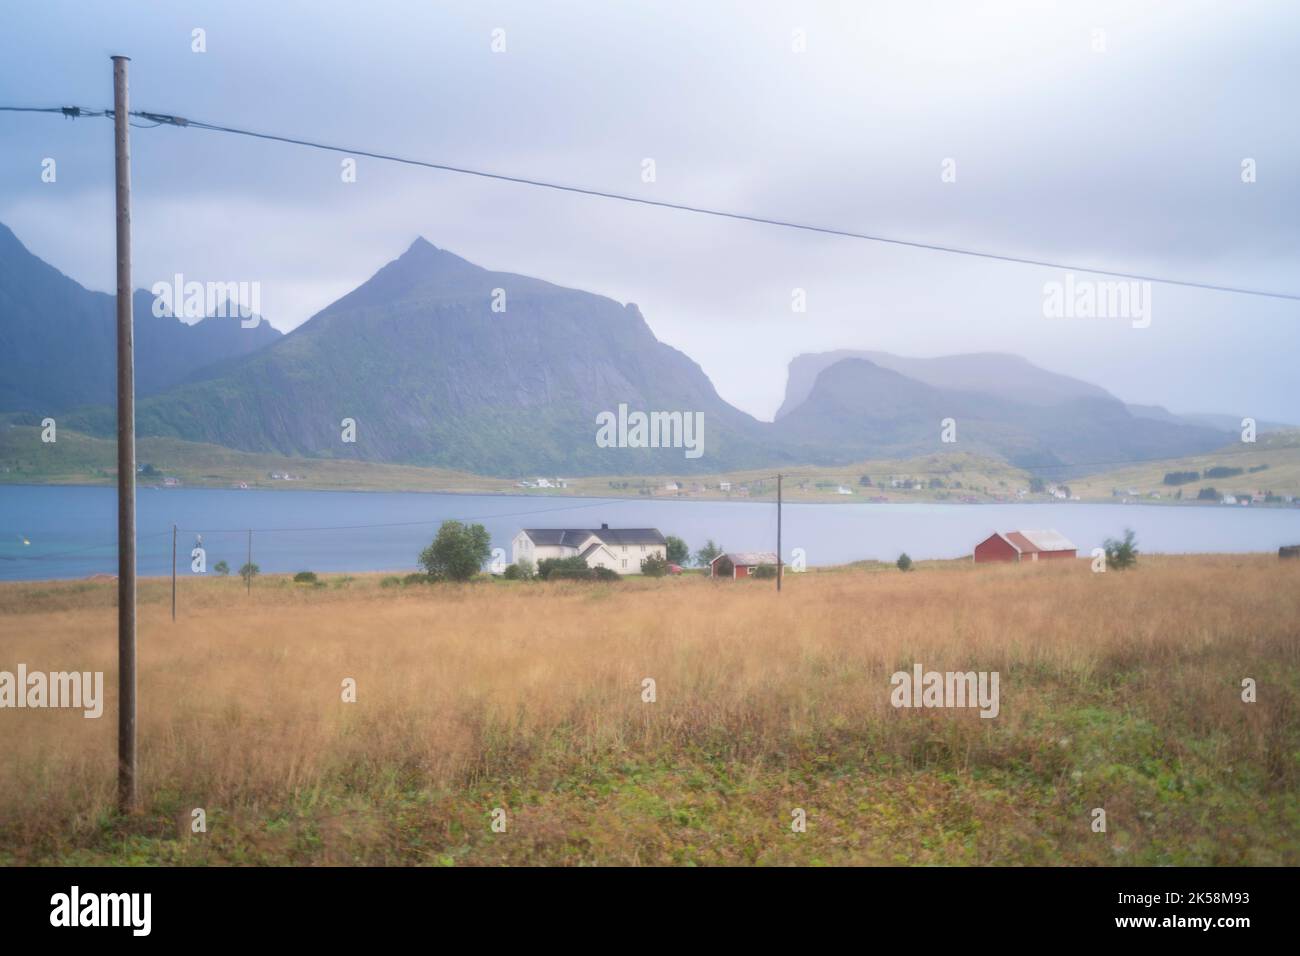 landscape view of a village in the fiords of Lofoten Islands, Norway on a cloudy day Stock Photo